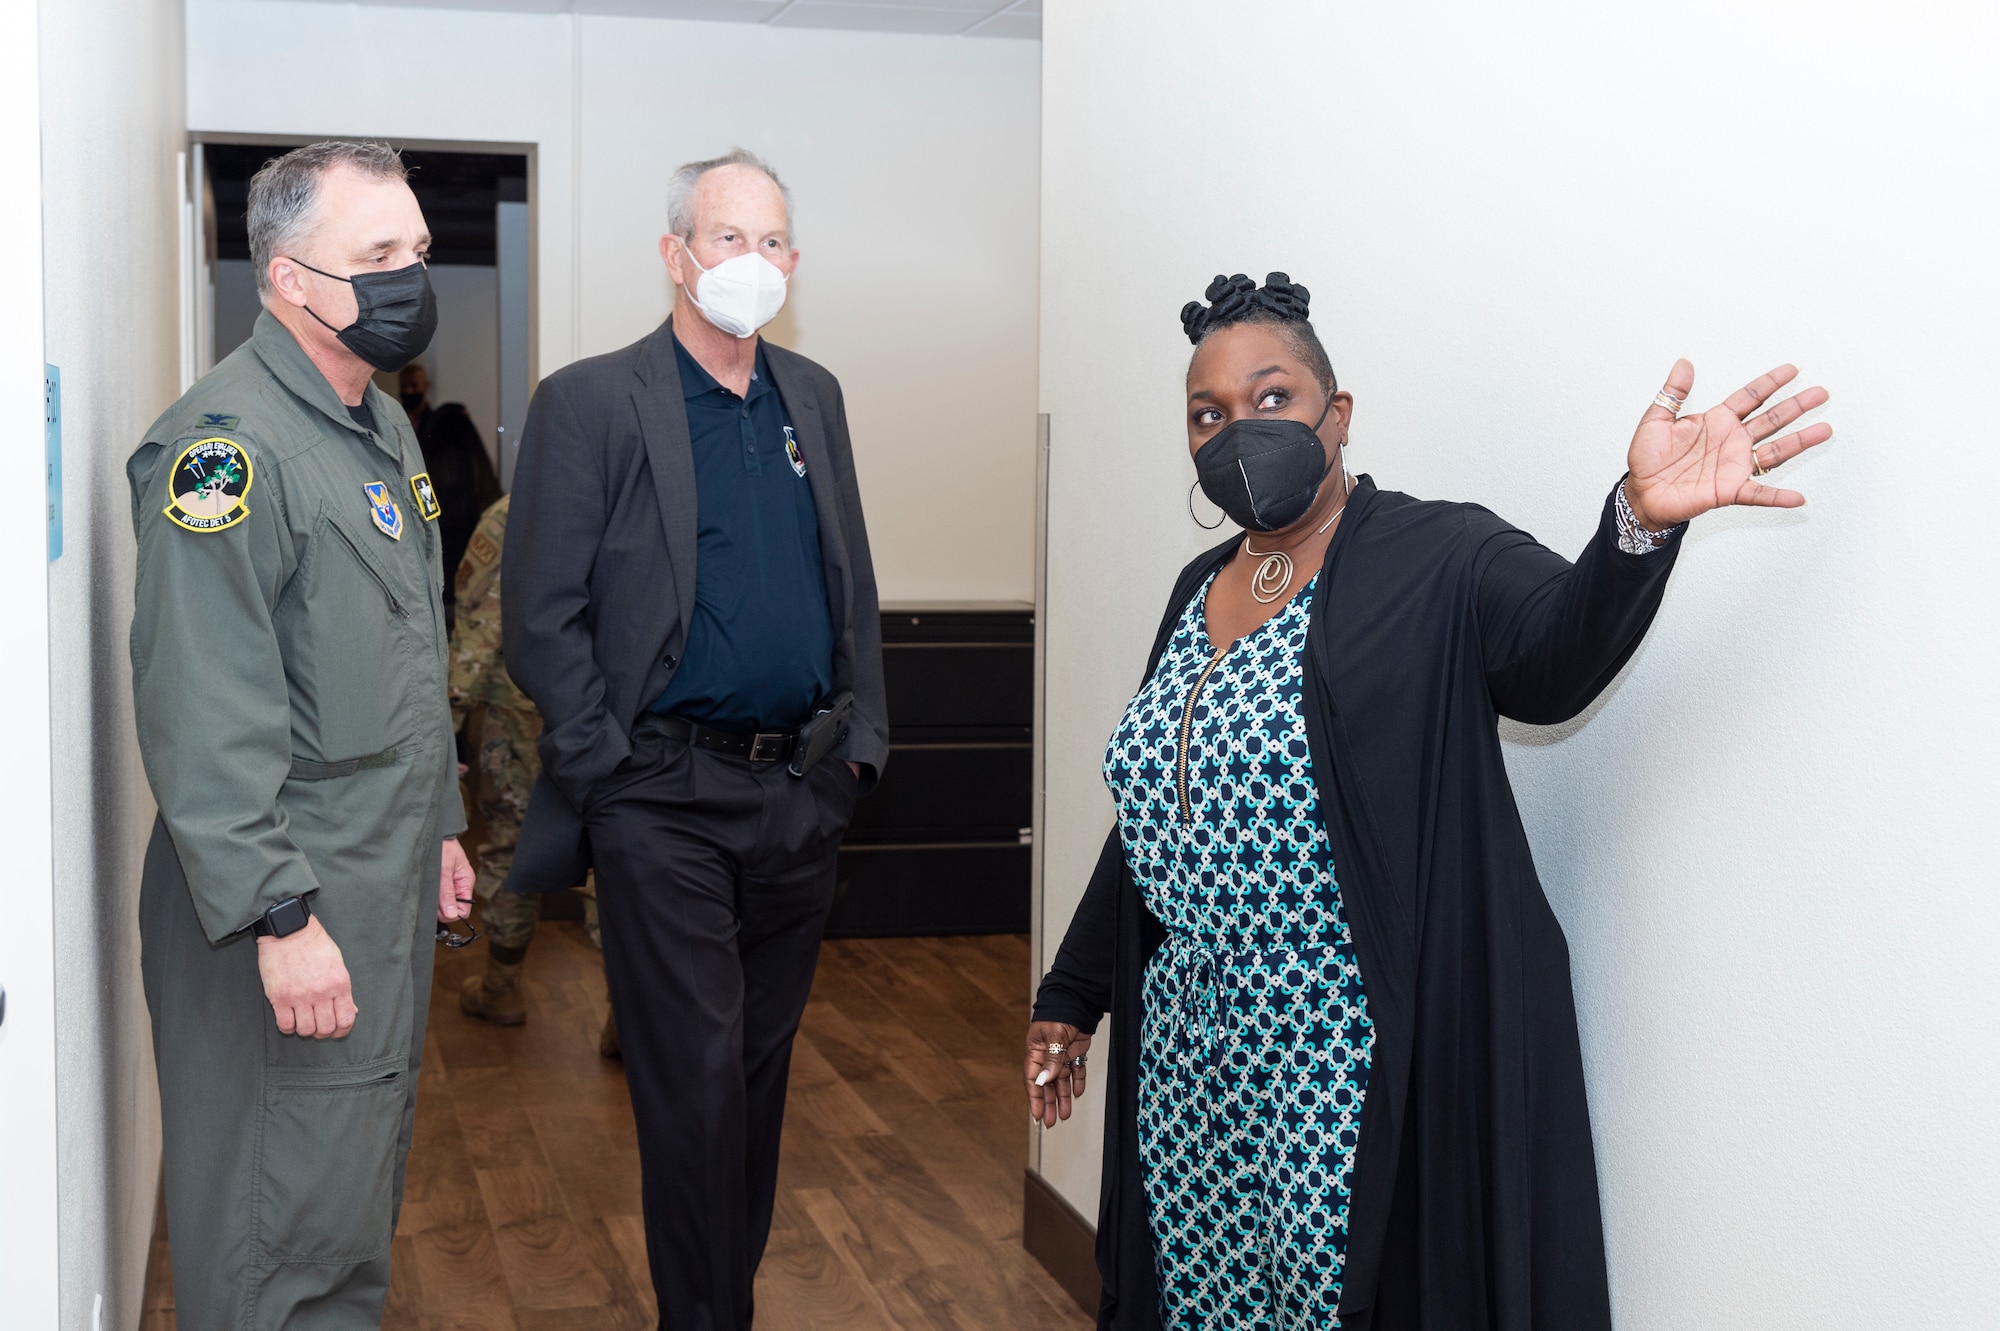 Ms. Ebony Graves, Sexual Assault Victim Advocate, provides a tour for Col. Keith Butler, Commander, AFOTEC Detachment 5 and Dr. David Smith, Director, AF Plant 42 through the new Helping Agencies facility at Edwards Air Force Base, California, Jan. 6.